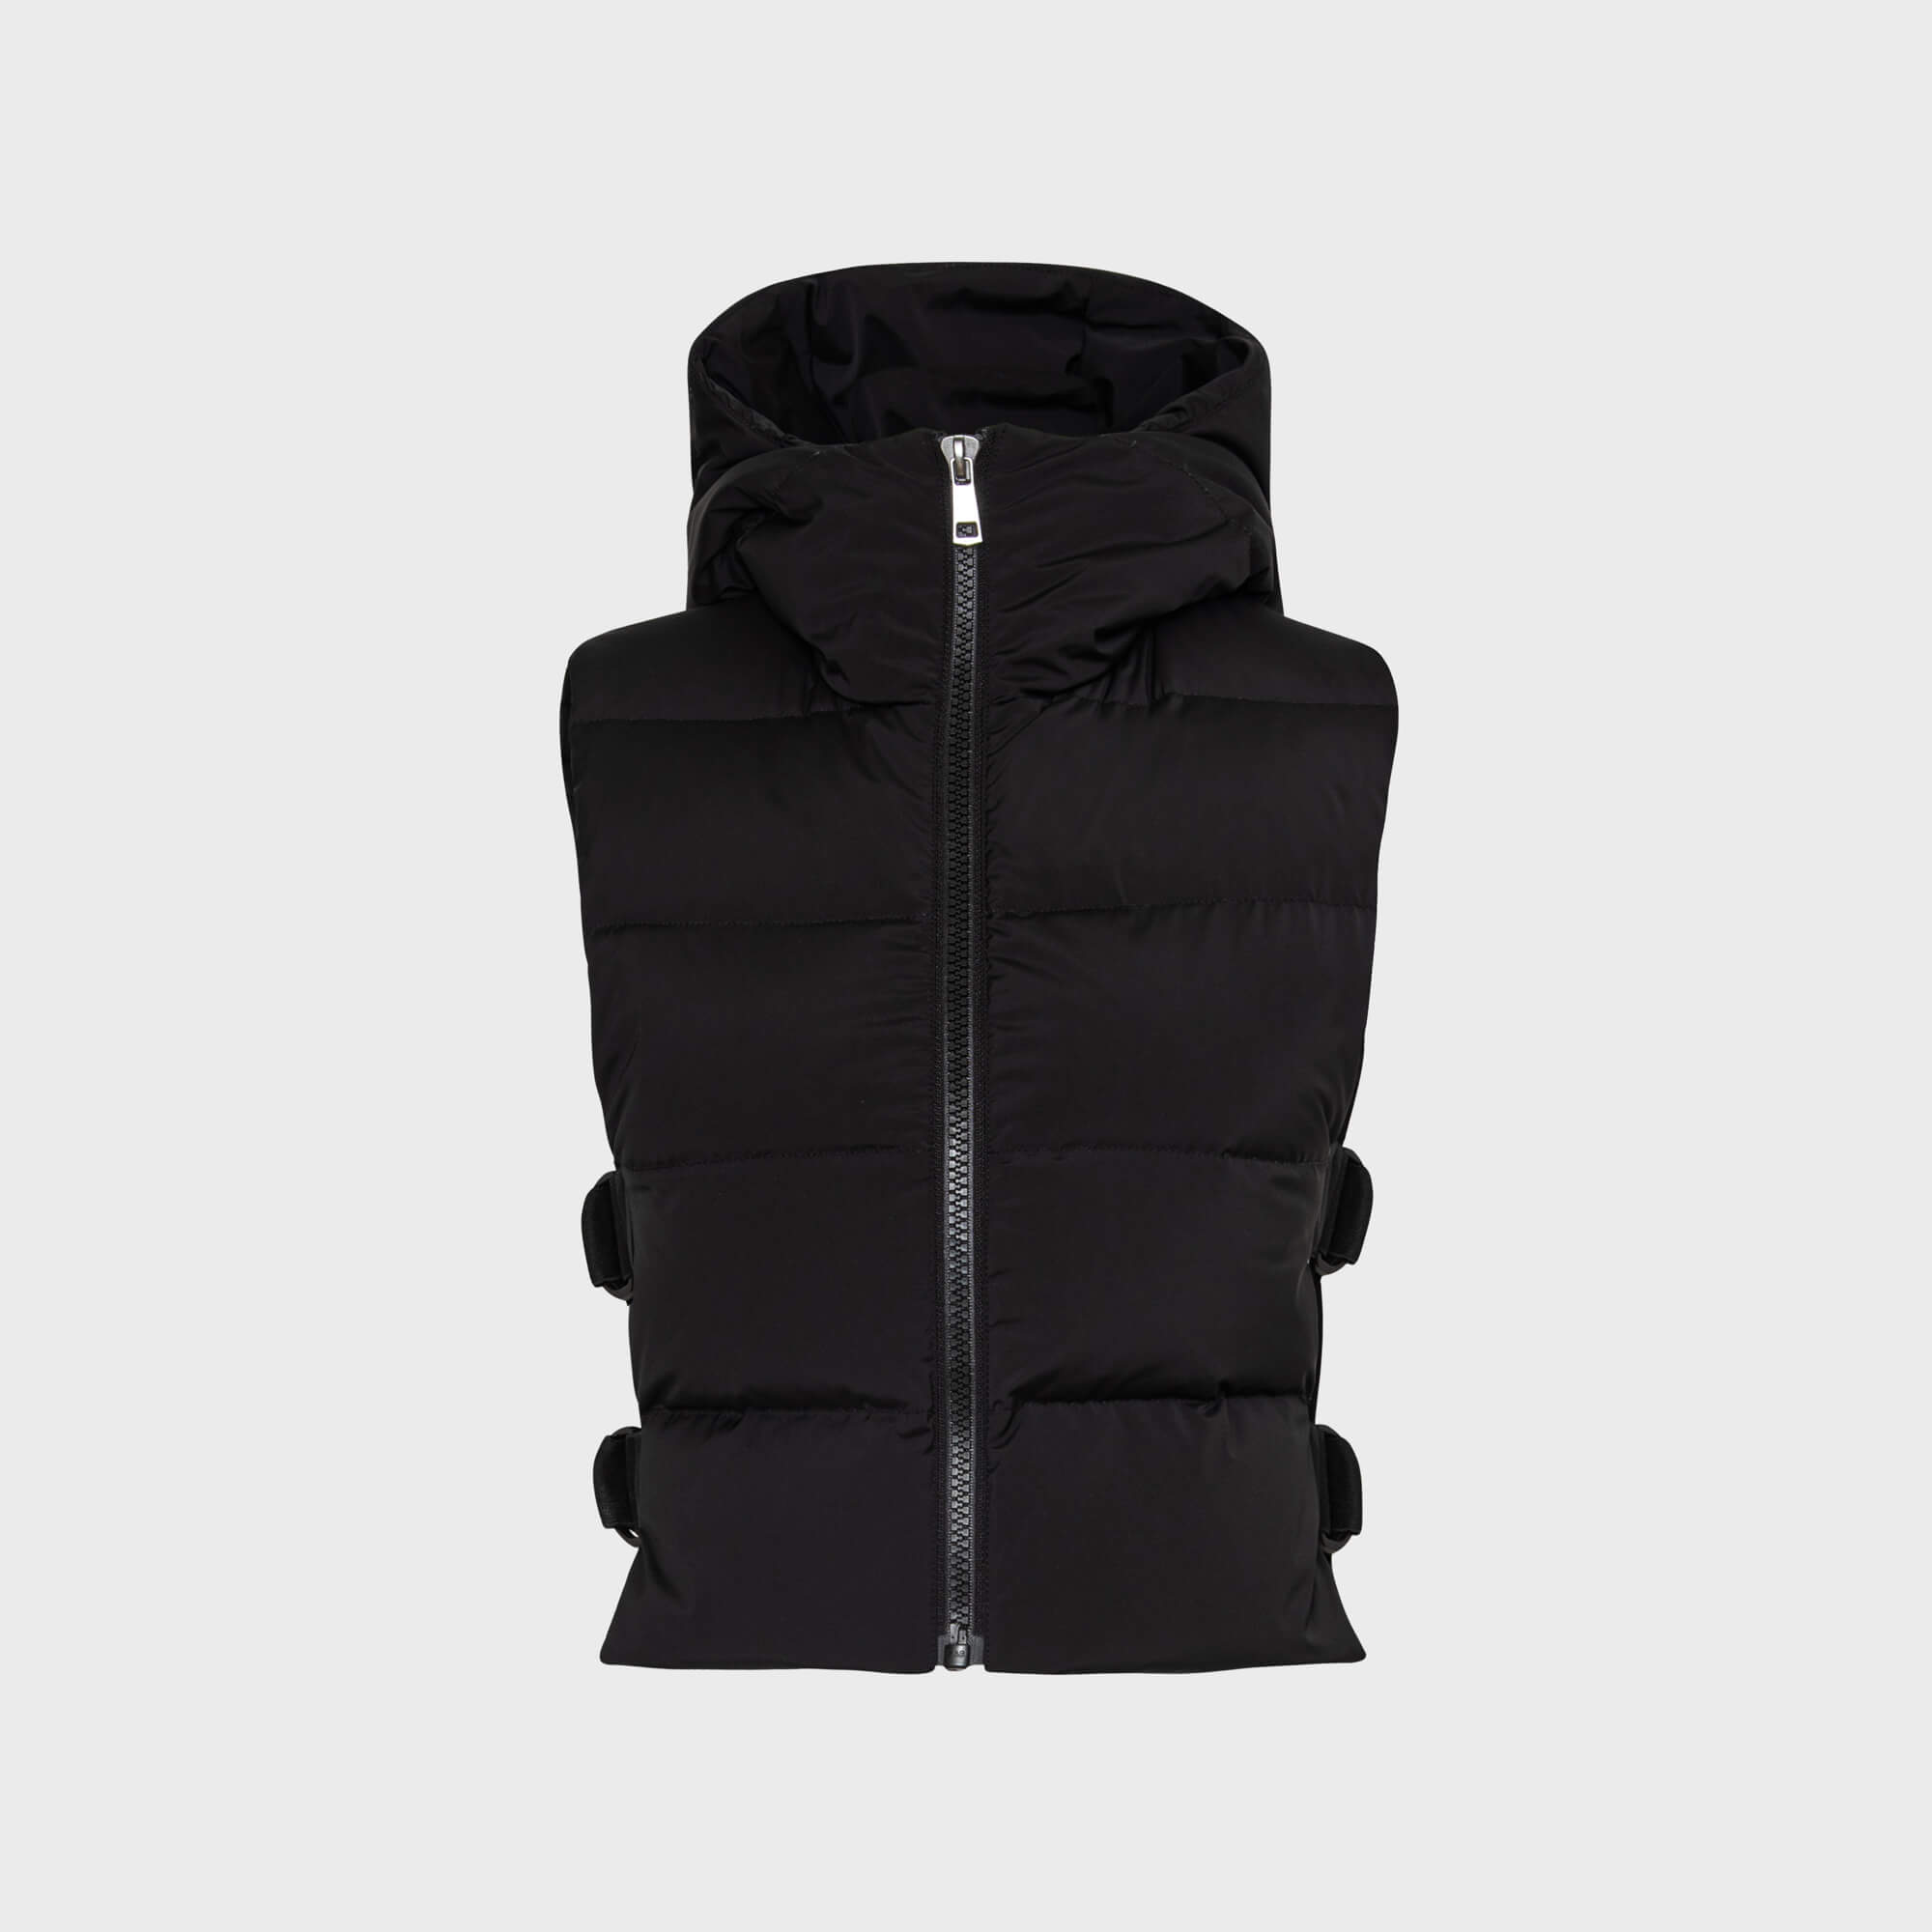 Lola quilted full zip gilet w/ adjustable side buckles